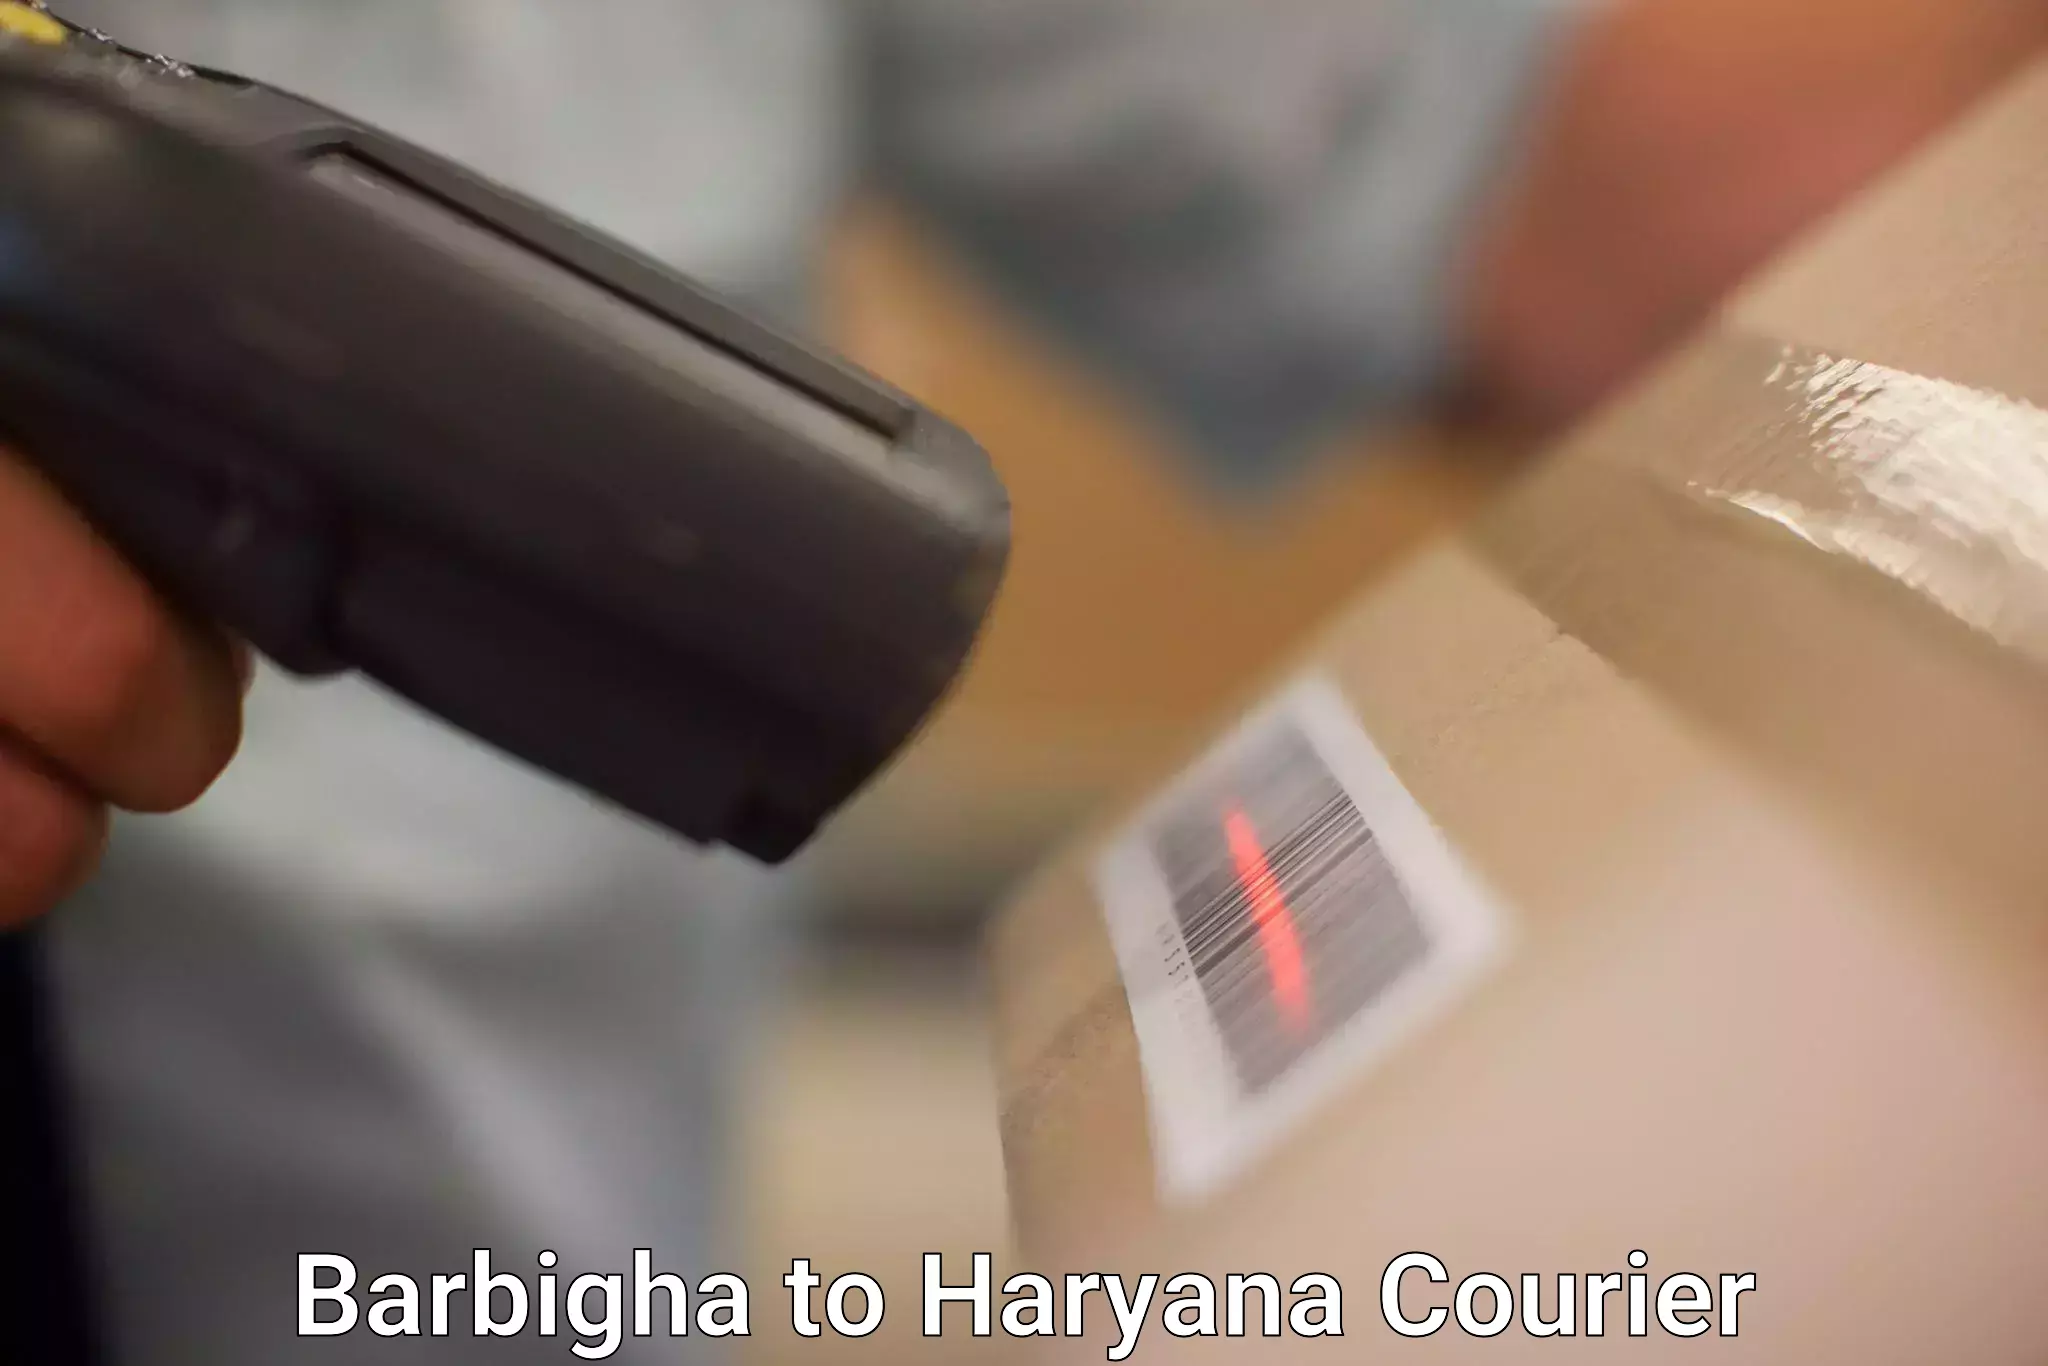 State-of-the-art courier technology Barbigha to Gurgaon